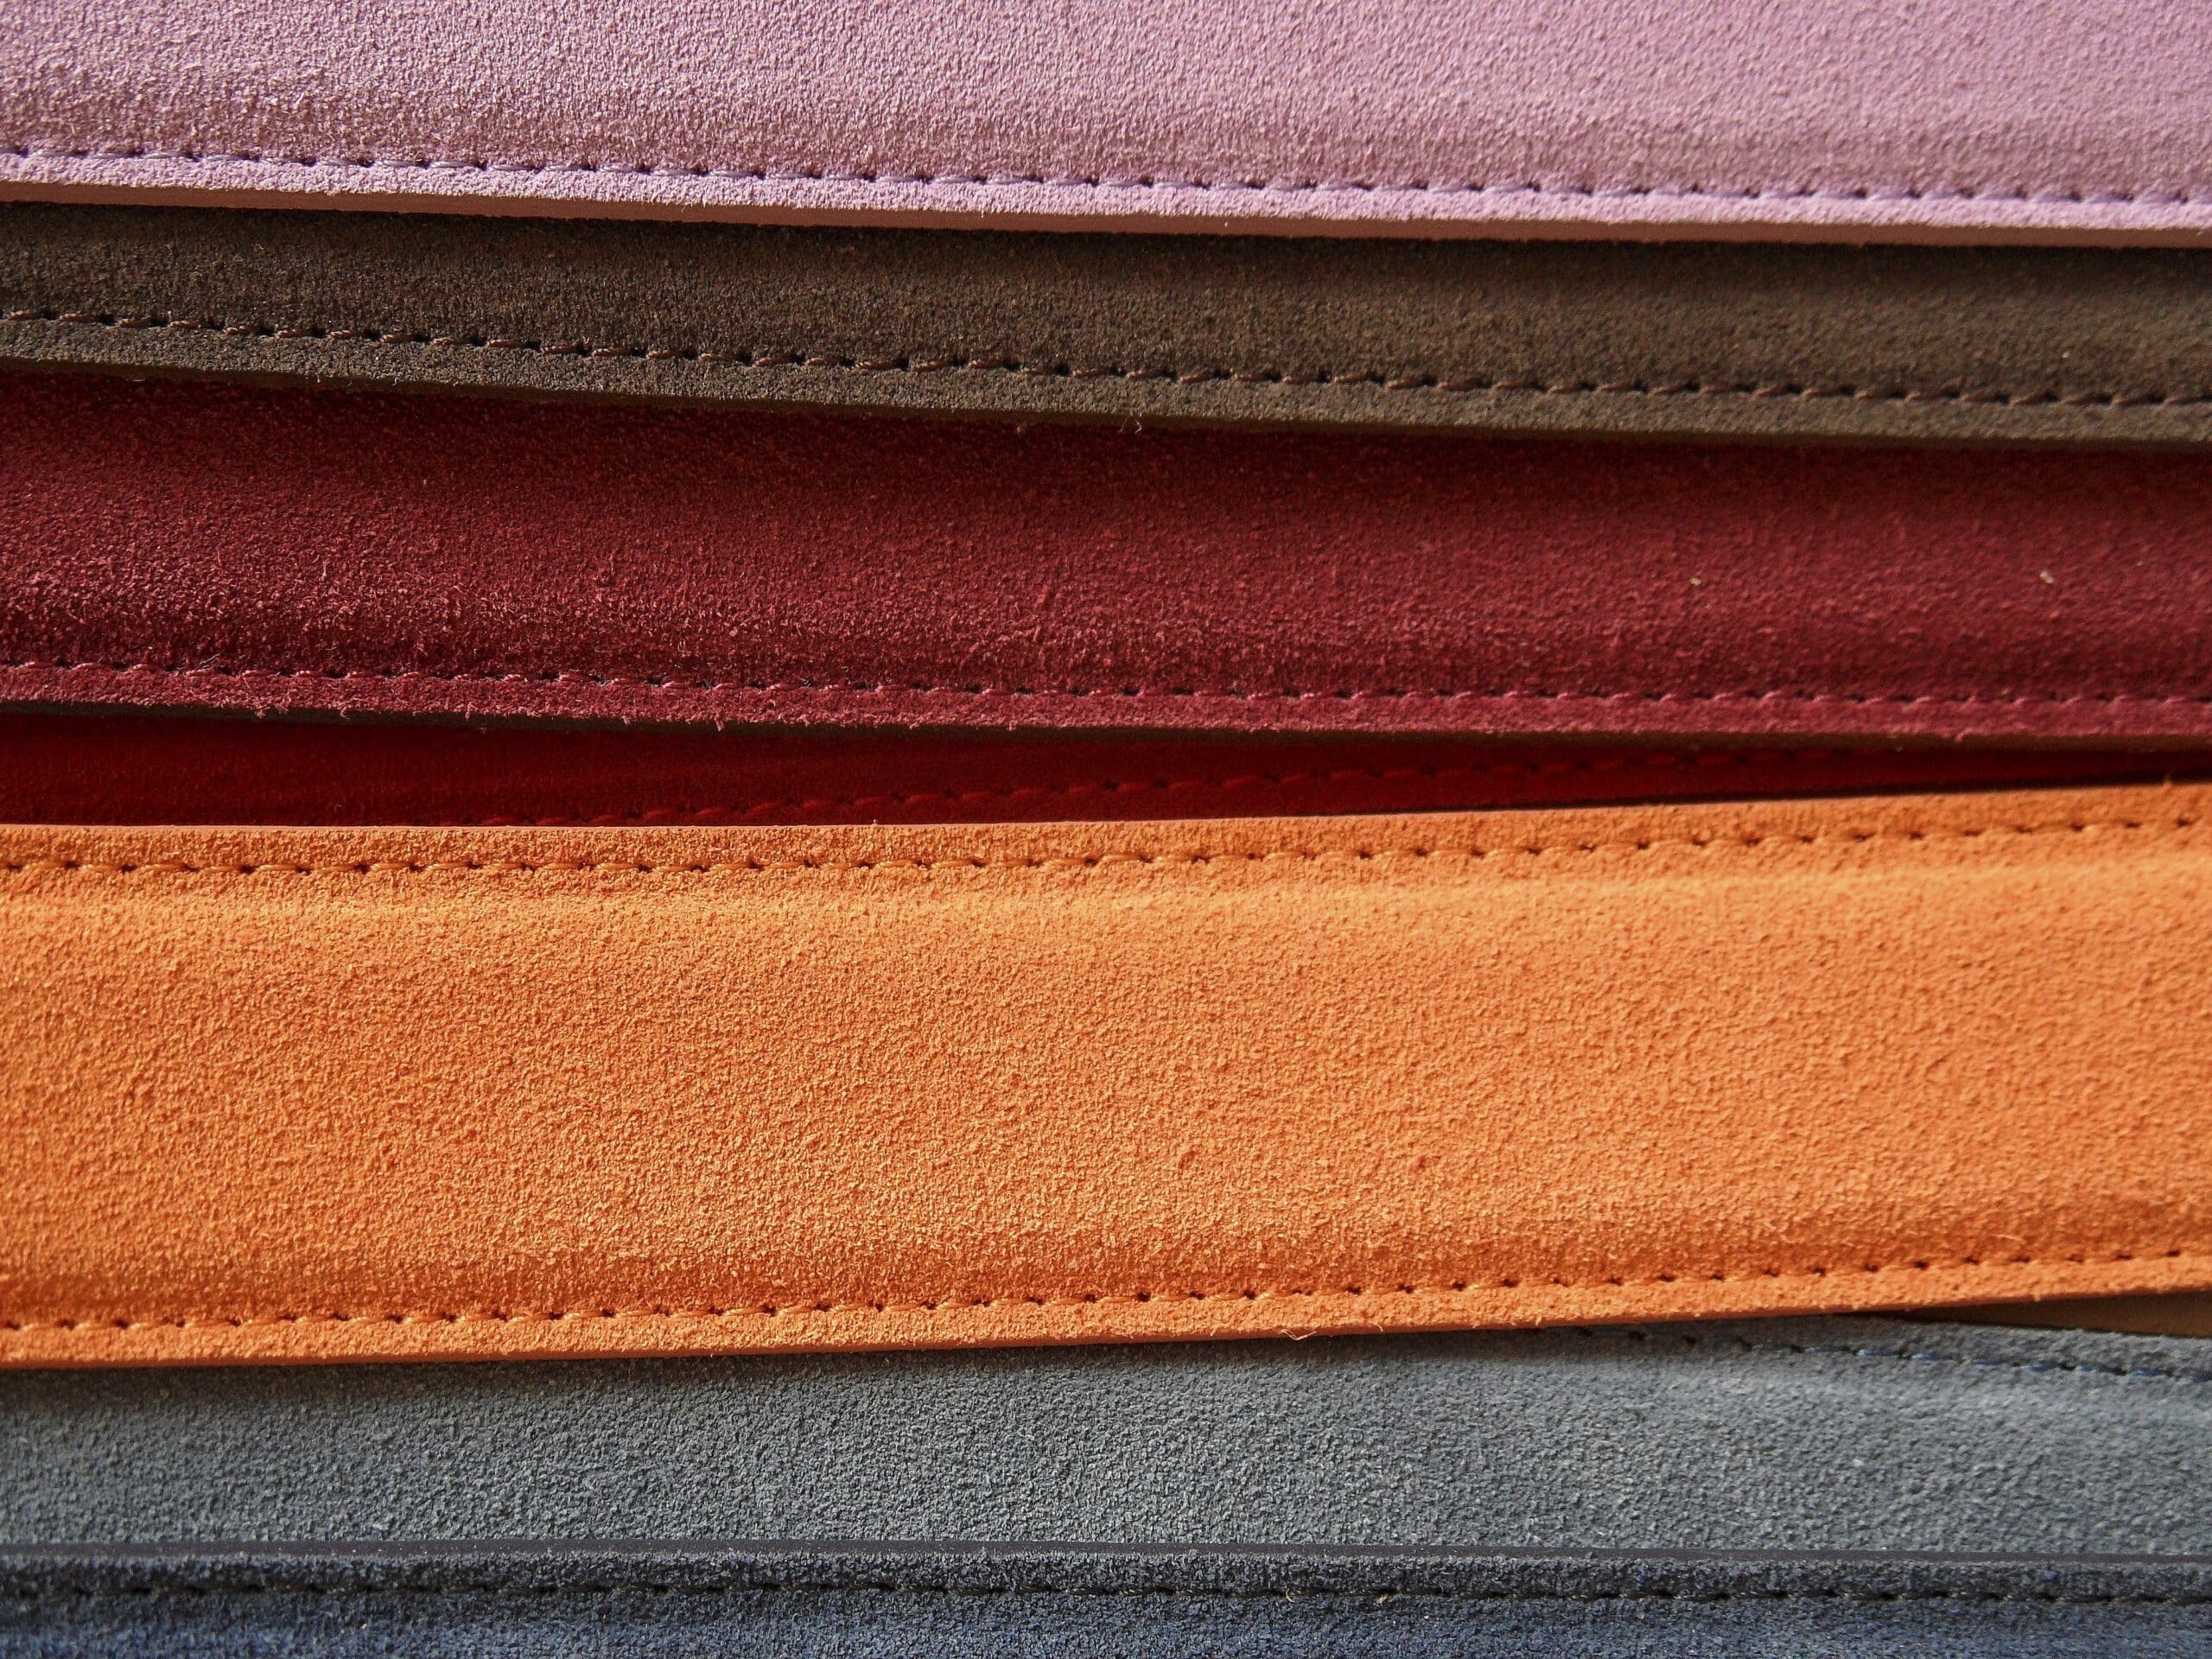 Analysing the Pros and Cons of Vegan Leather